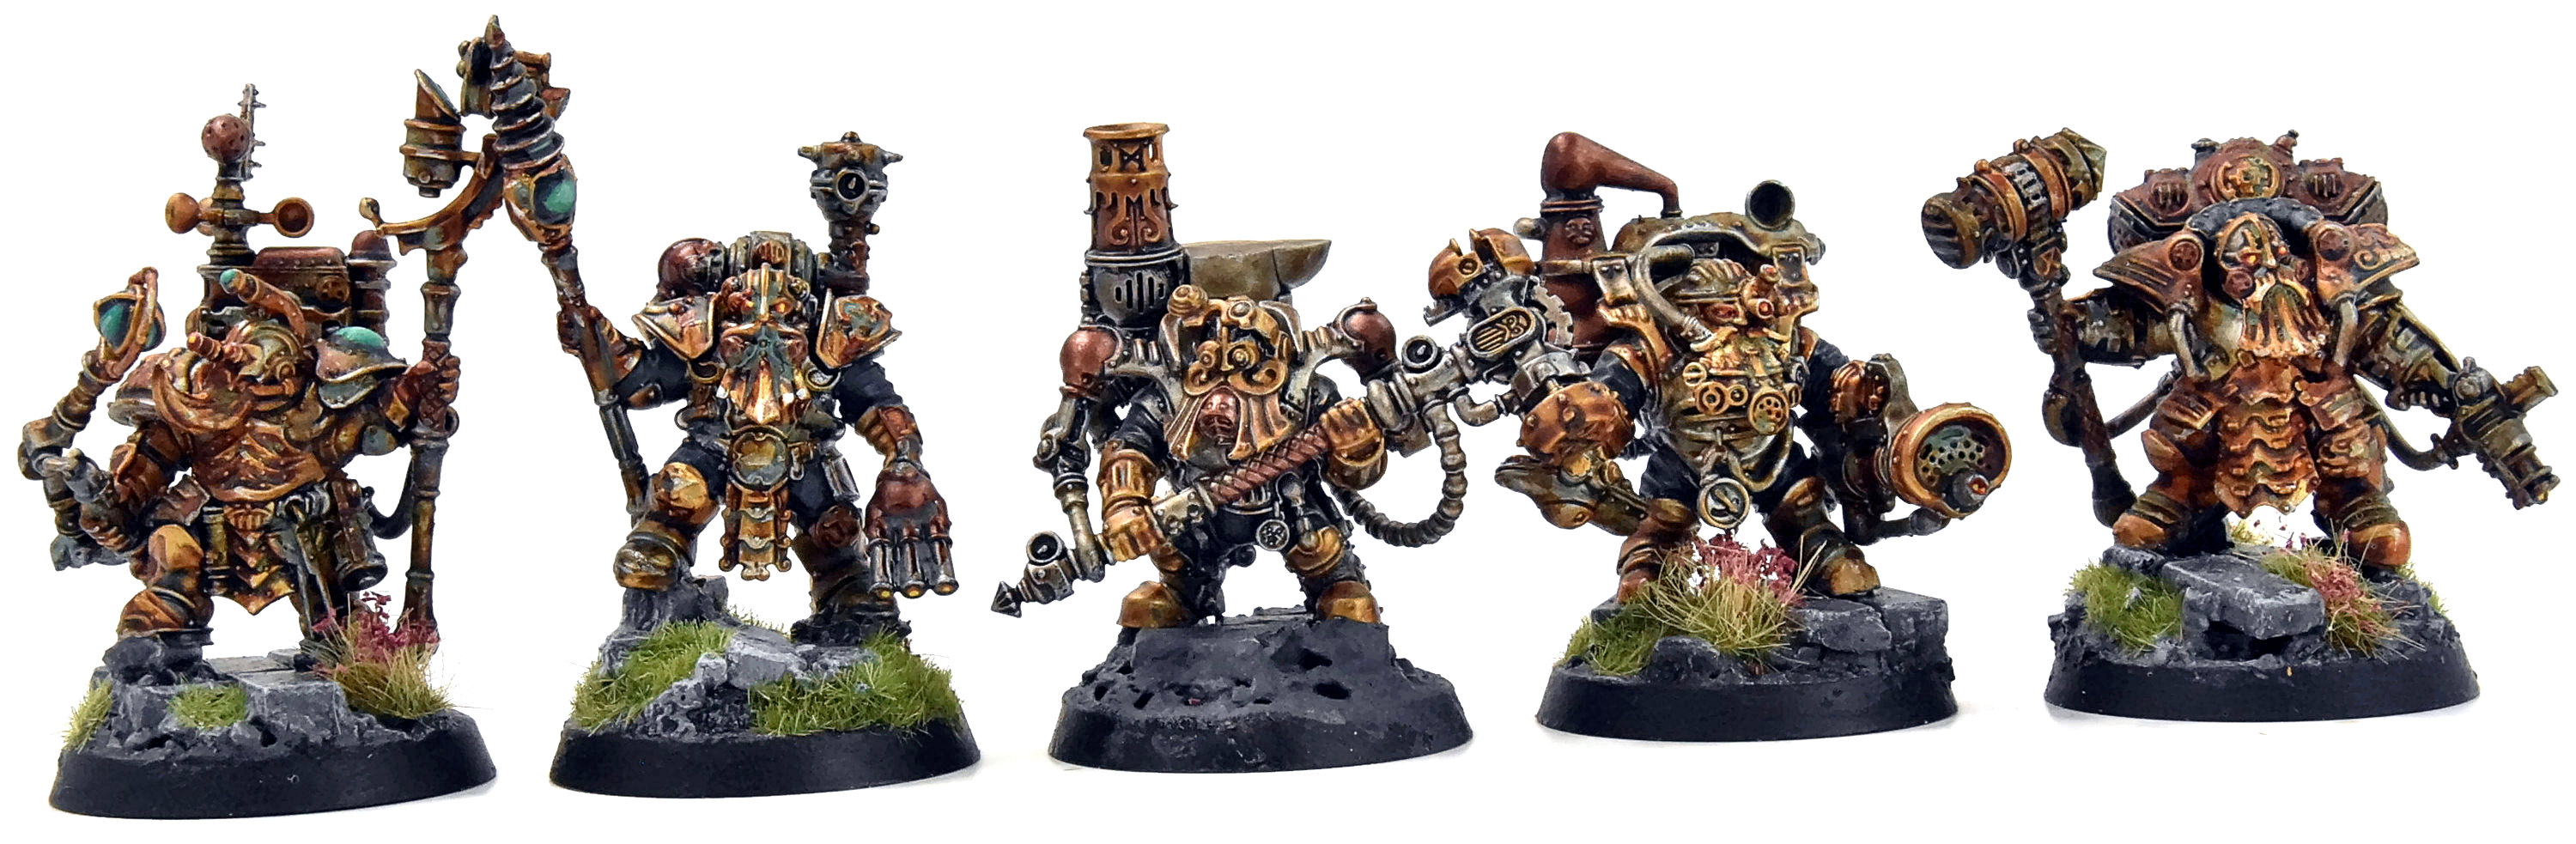 KHARADRON OVERLORDS Army PRO PAINTED Warhammer Sigmar 748034131153 | eBay